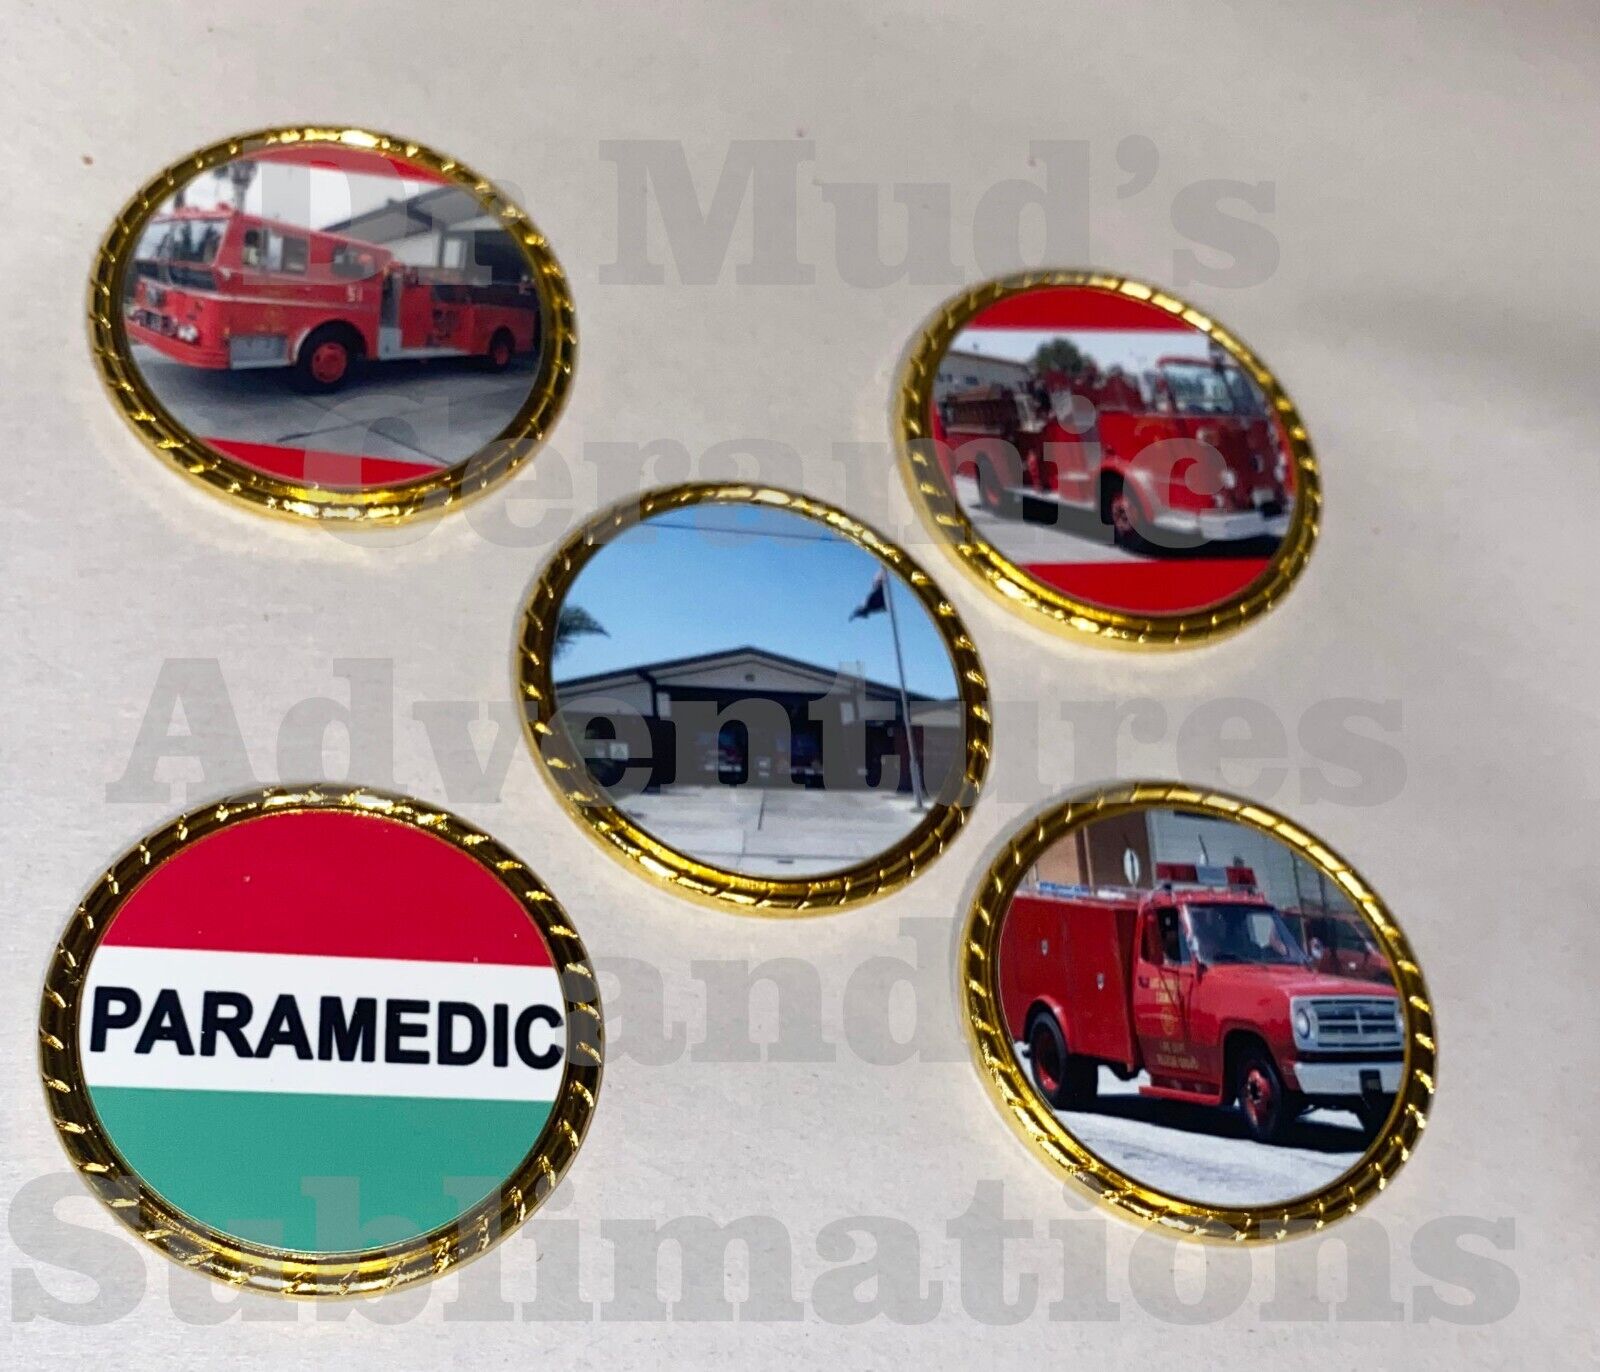 Set of 5 Squad 51 Station 51 Engines 51 LA County Fire Dept Paramedic coins